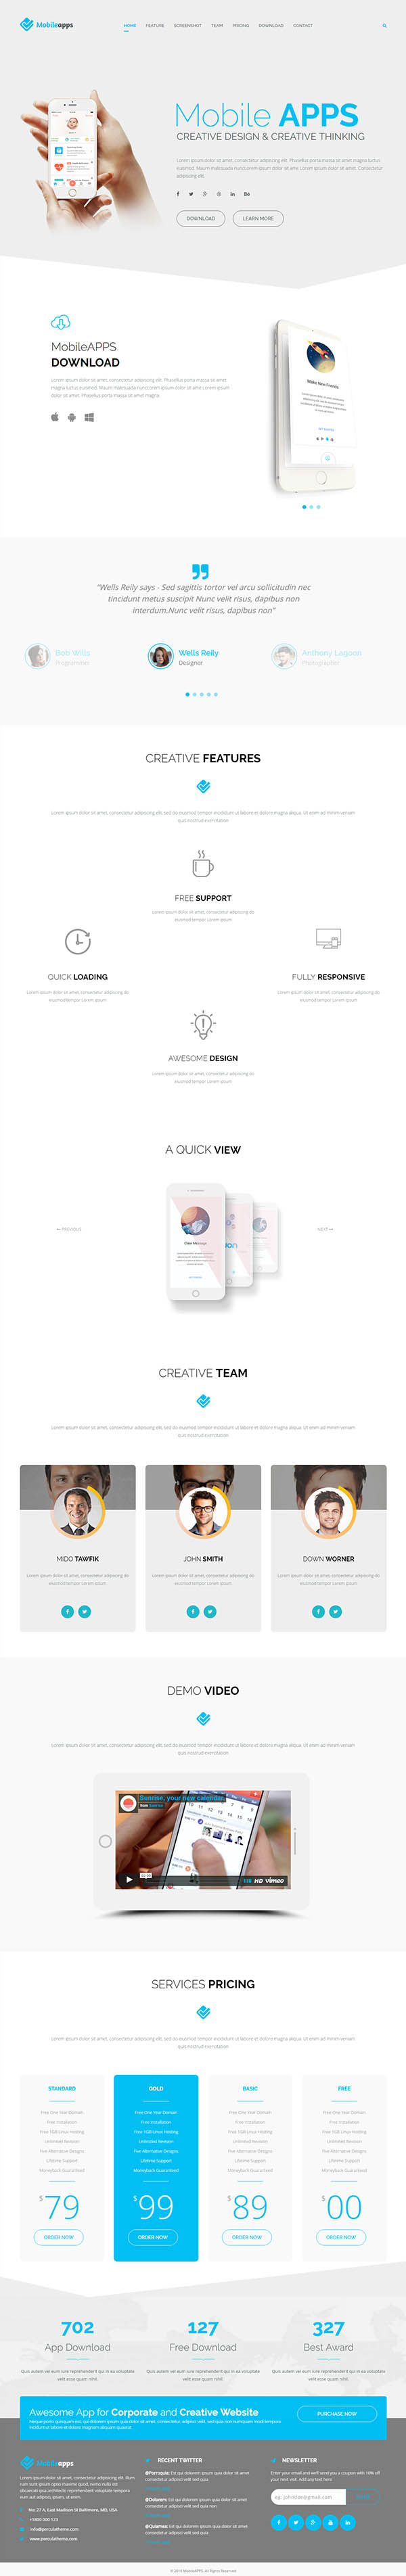 MobileApps - Responsive Mobile App Landing Page-HTML Template